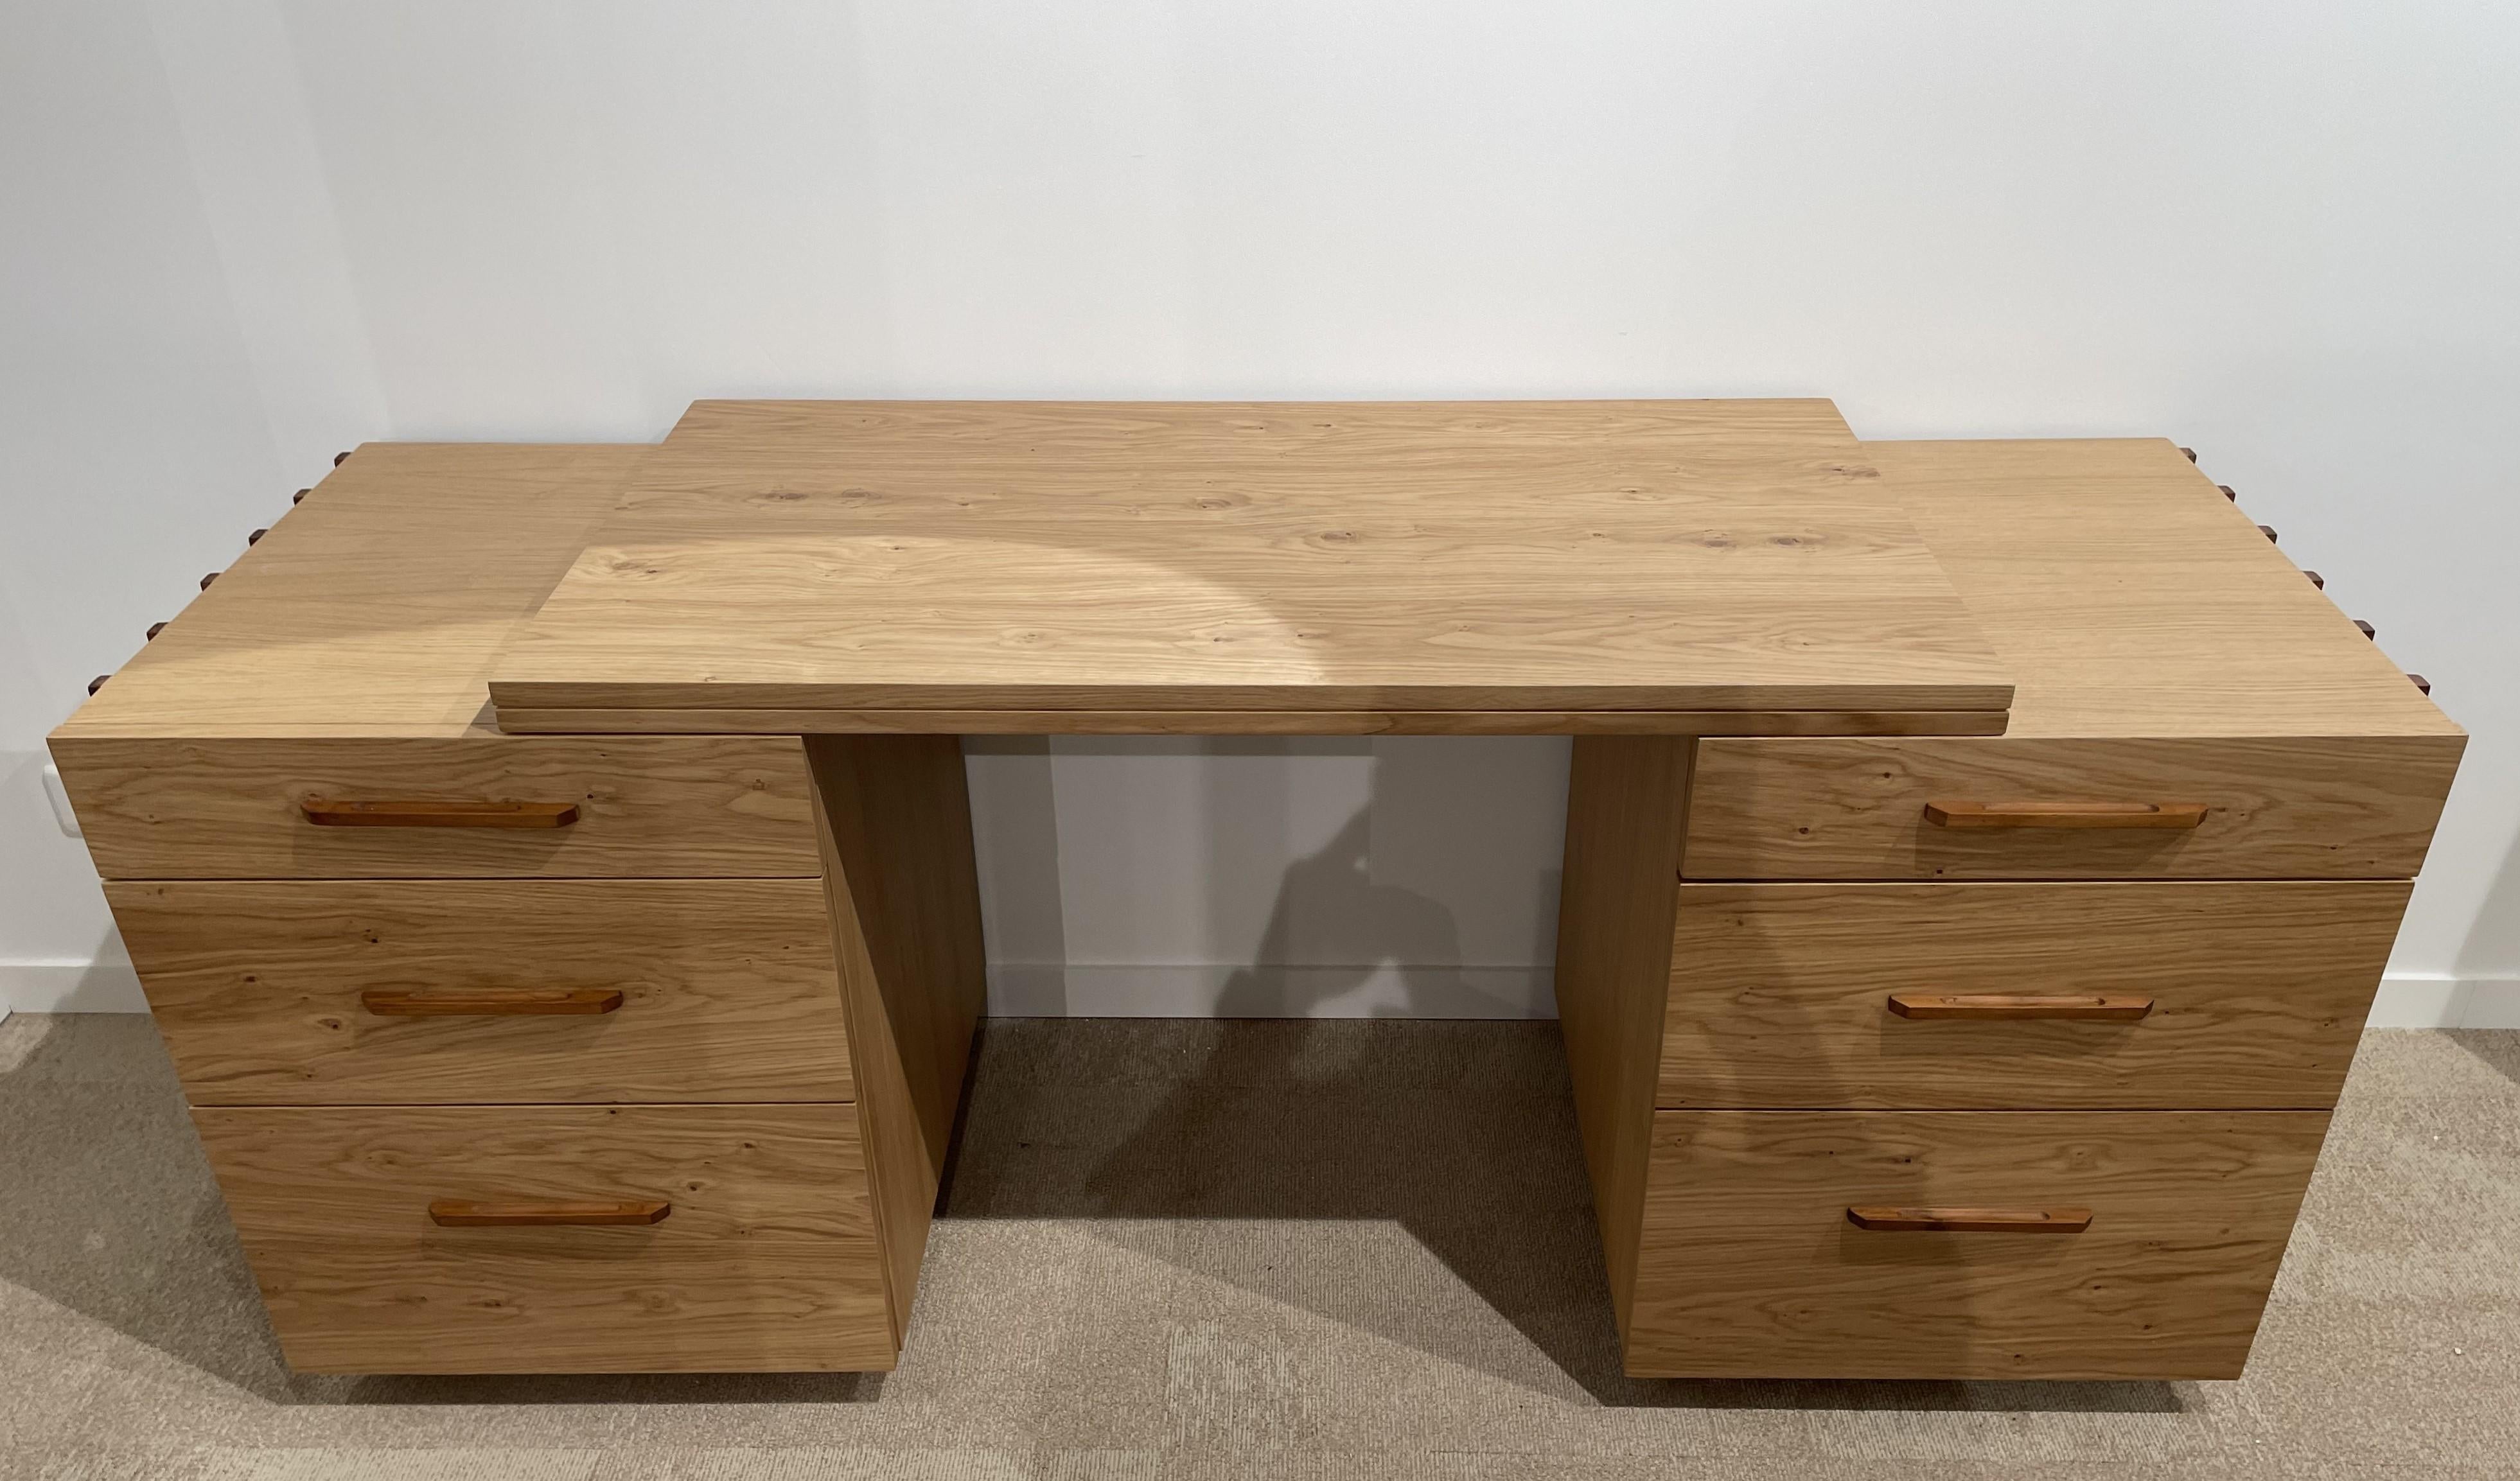 European Scandinavian Design Solid Oak And Leather Modular Desk Into A Chest Of Drawers